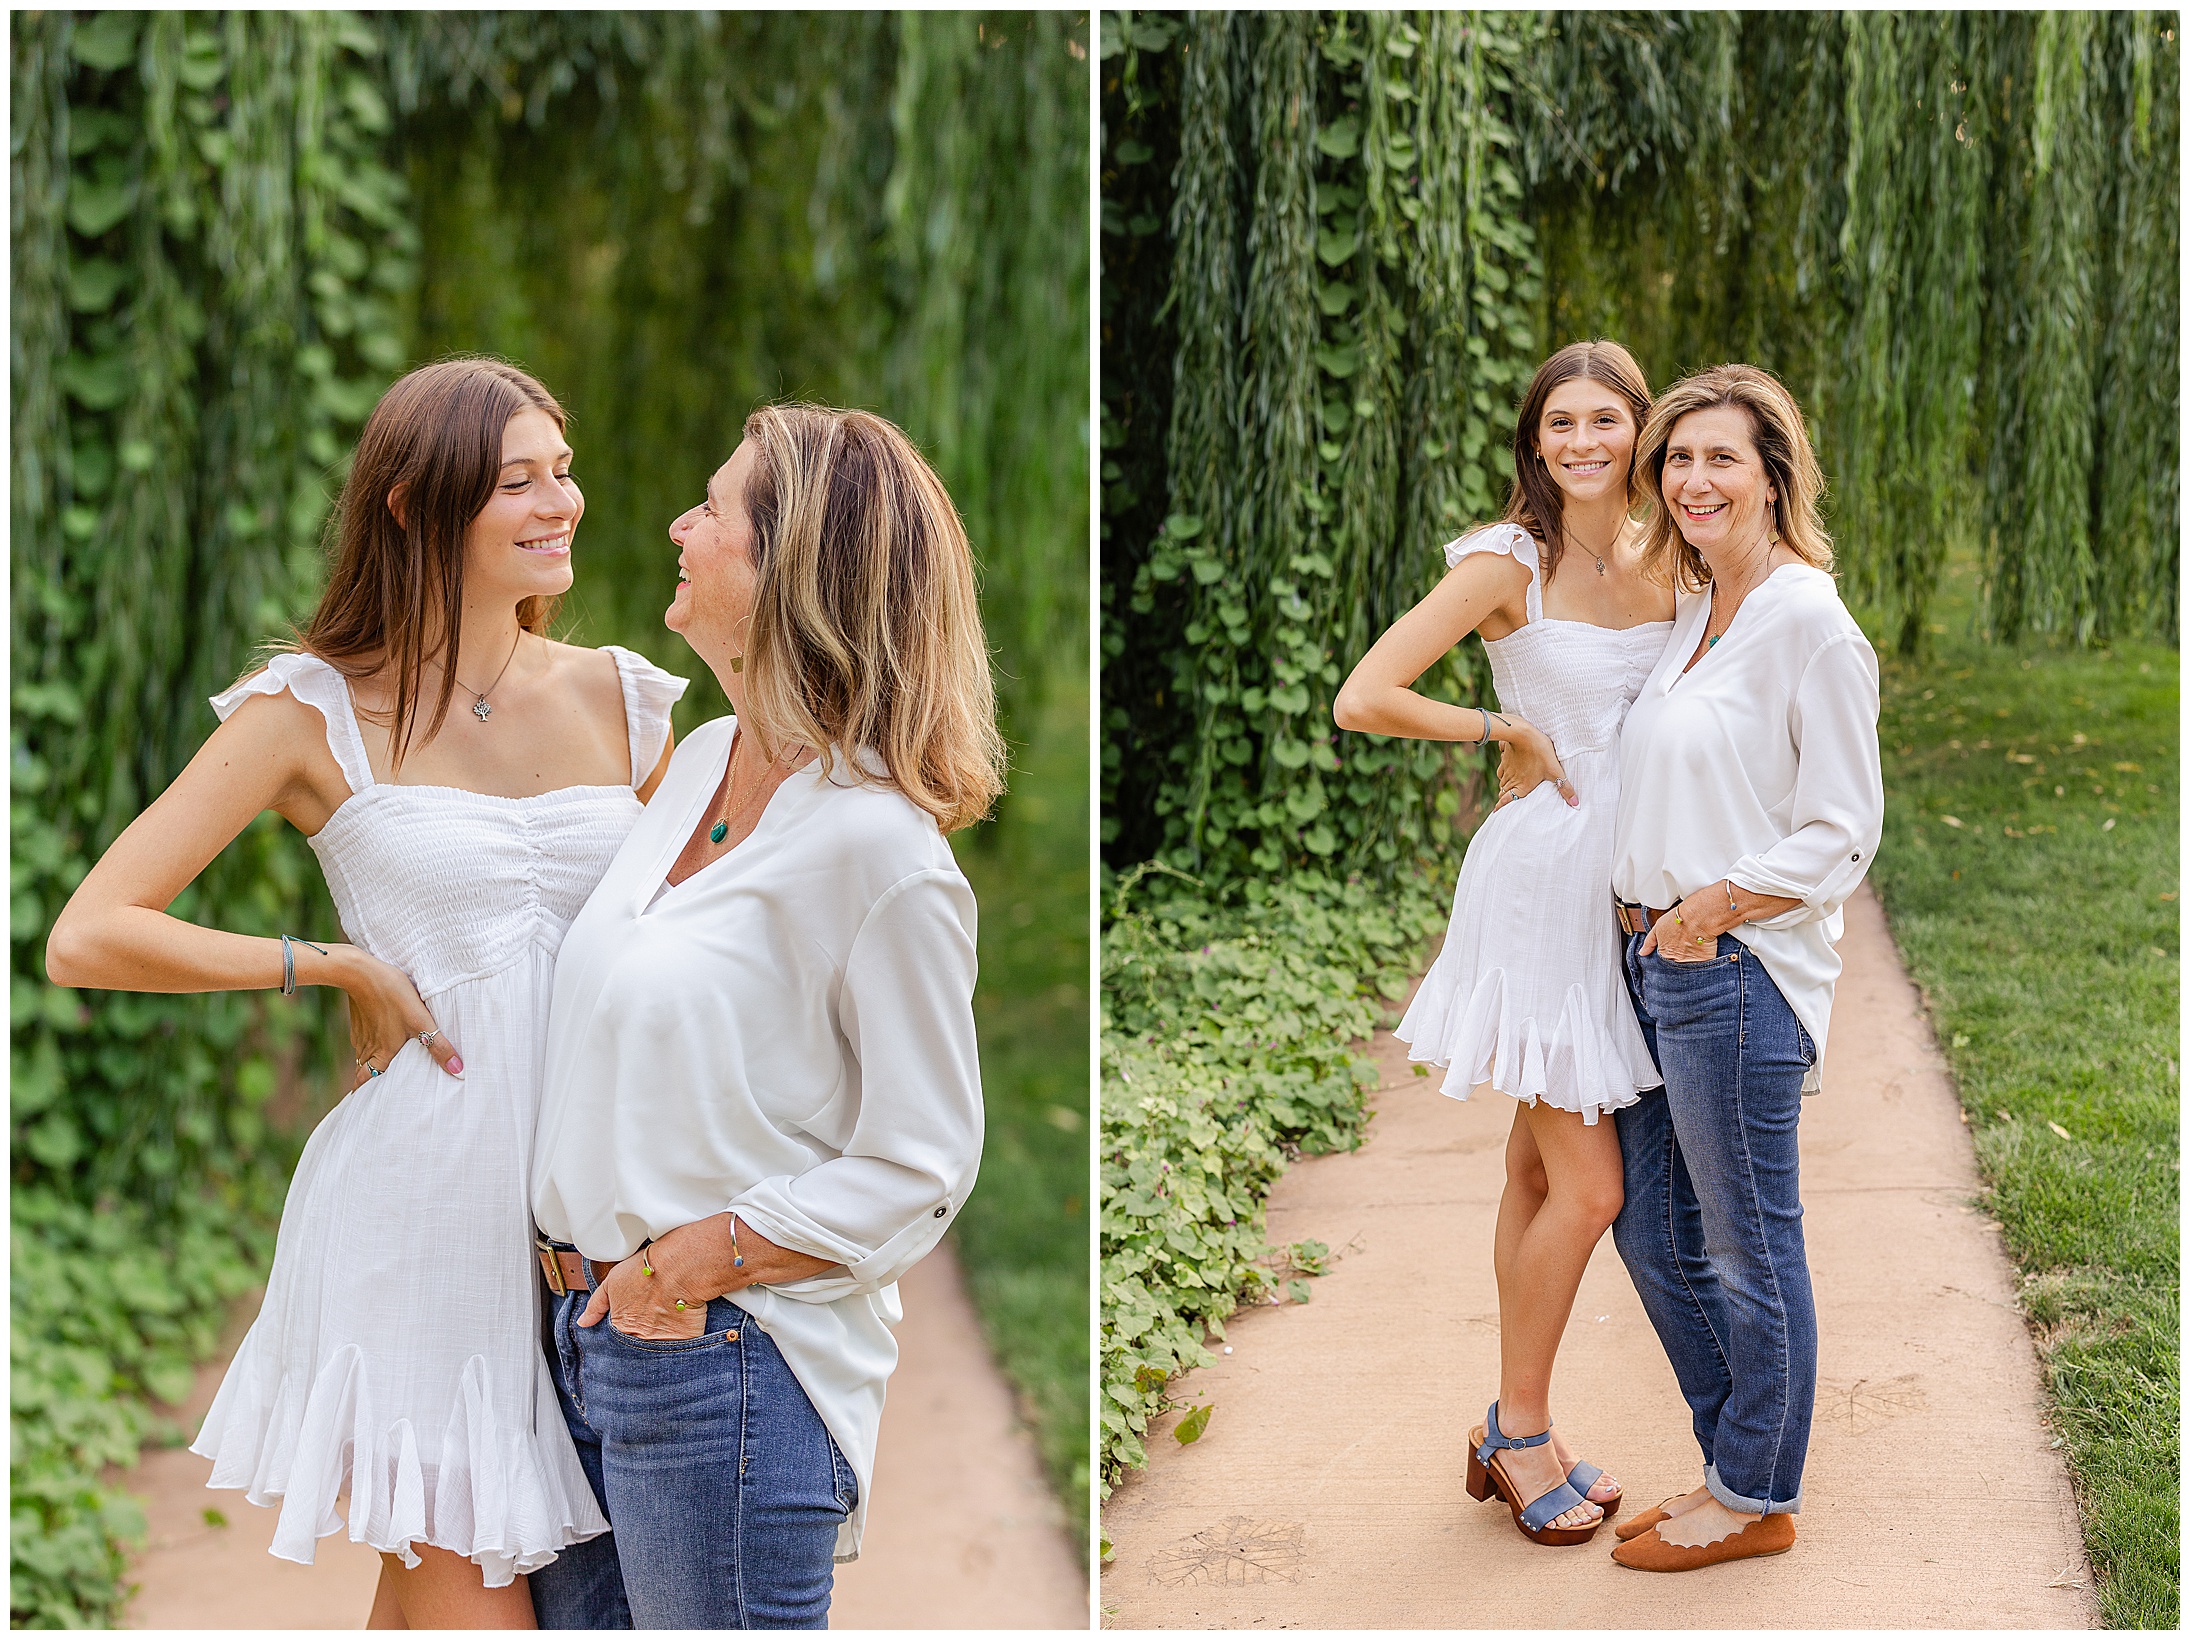 White Ranch Events Senior Session Chico CA Family Willow Tree 2022,